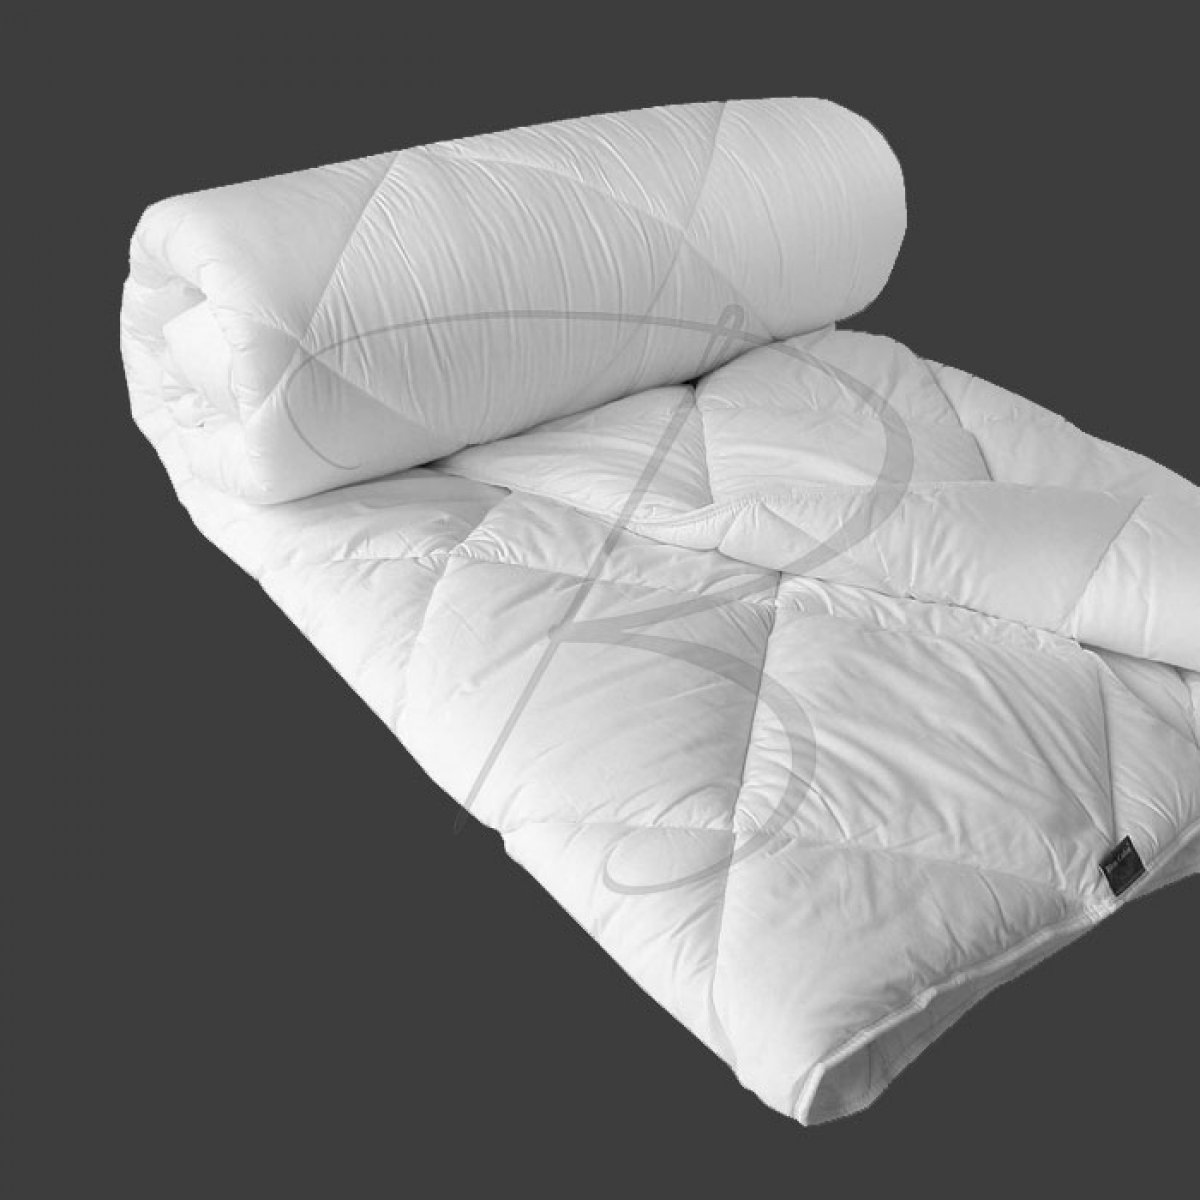 Pyrenees synthetic comforter - 350g/m² - 200 x 200